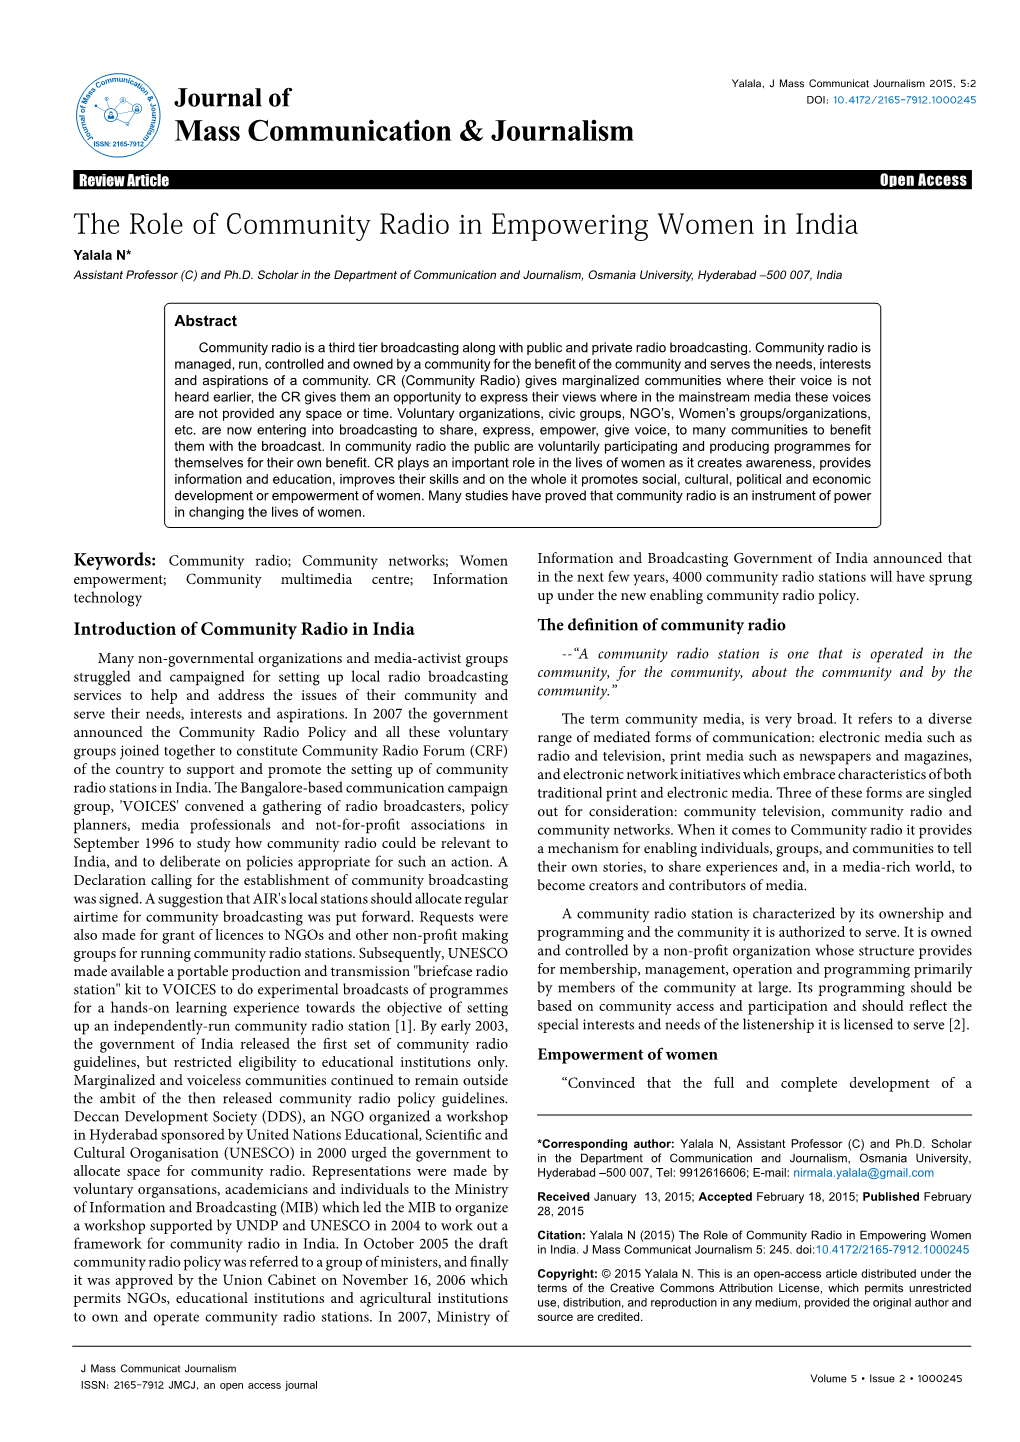 Community Radio in Empowering Women in India Yalala N* Assistant Professor (C) and Ph.D